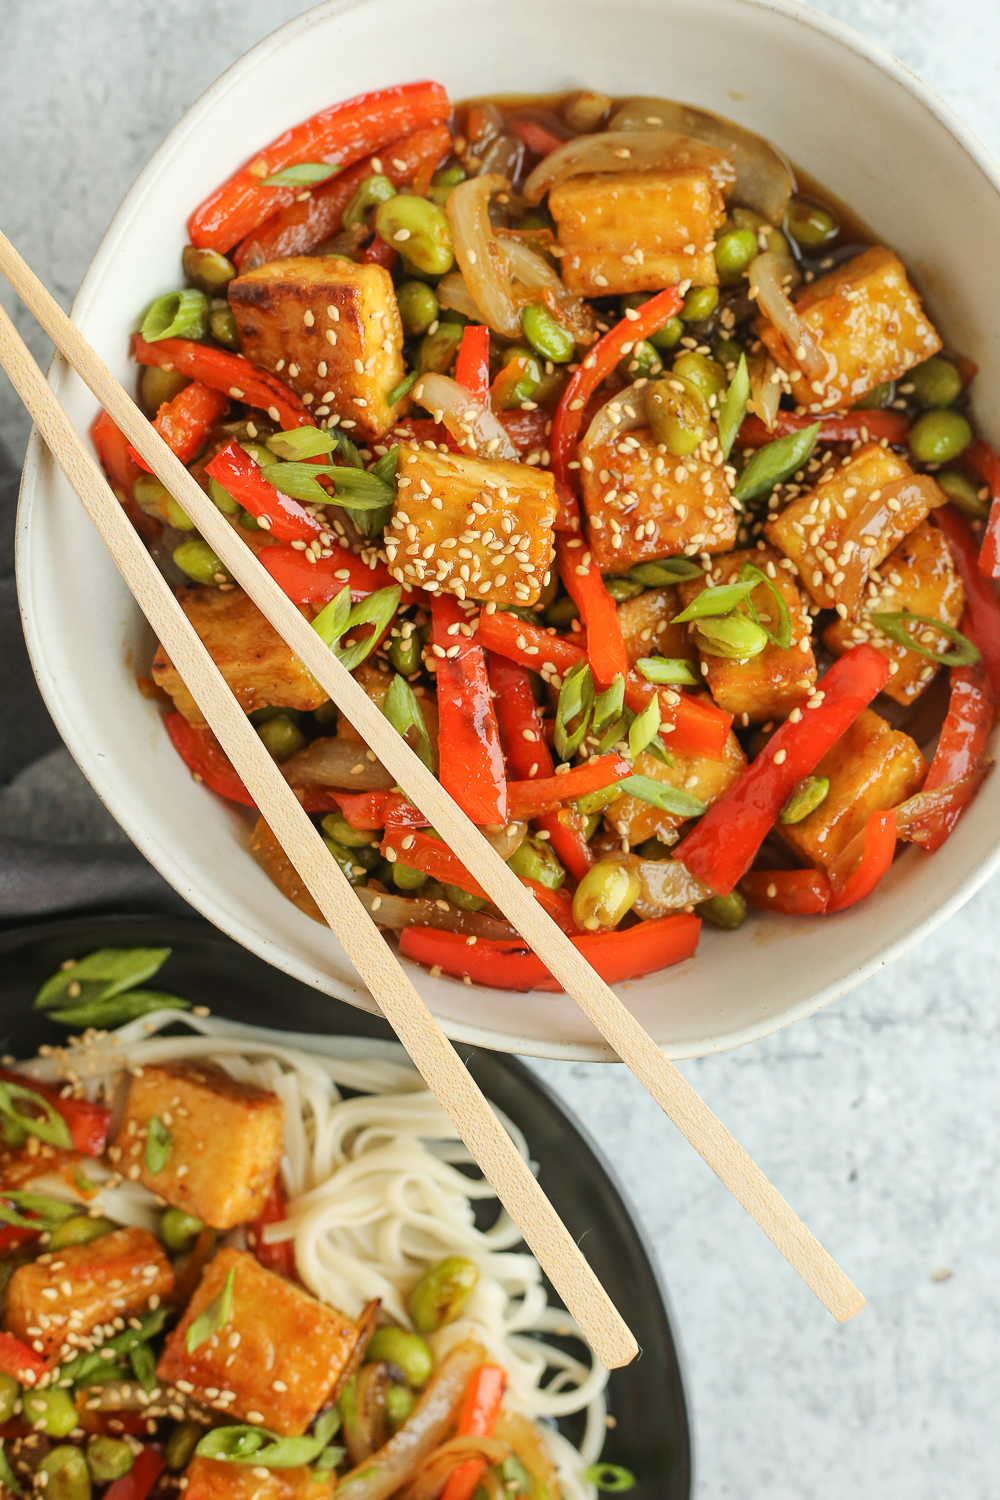 An overhead view of a vegetarian orange tofu stir fry recipe in a white bowl with wooden chopsticks